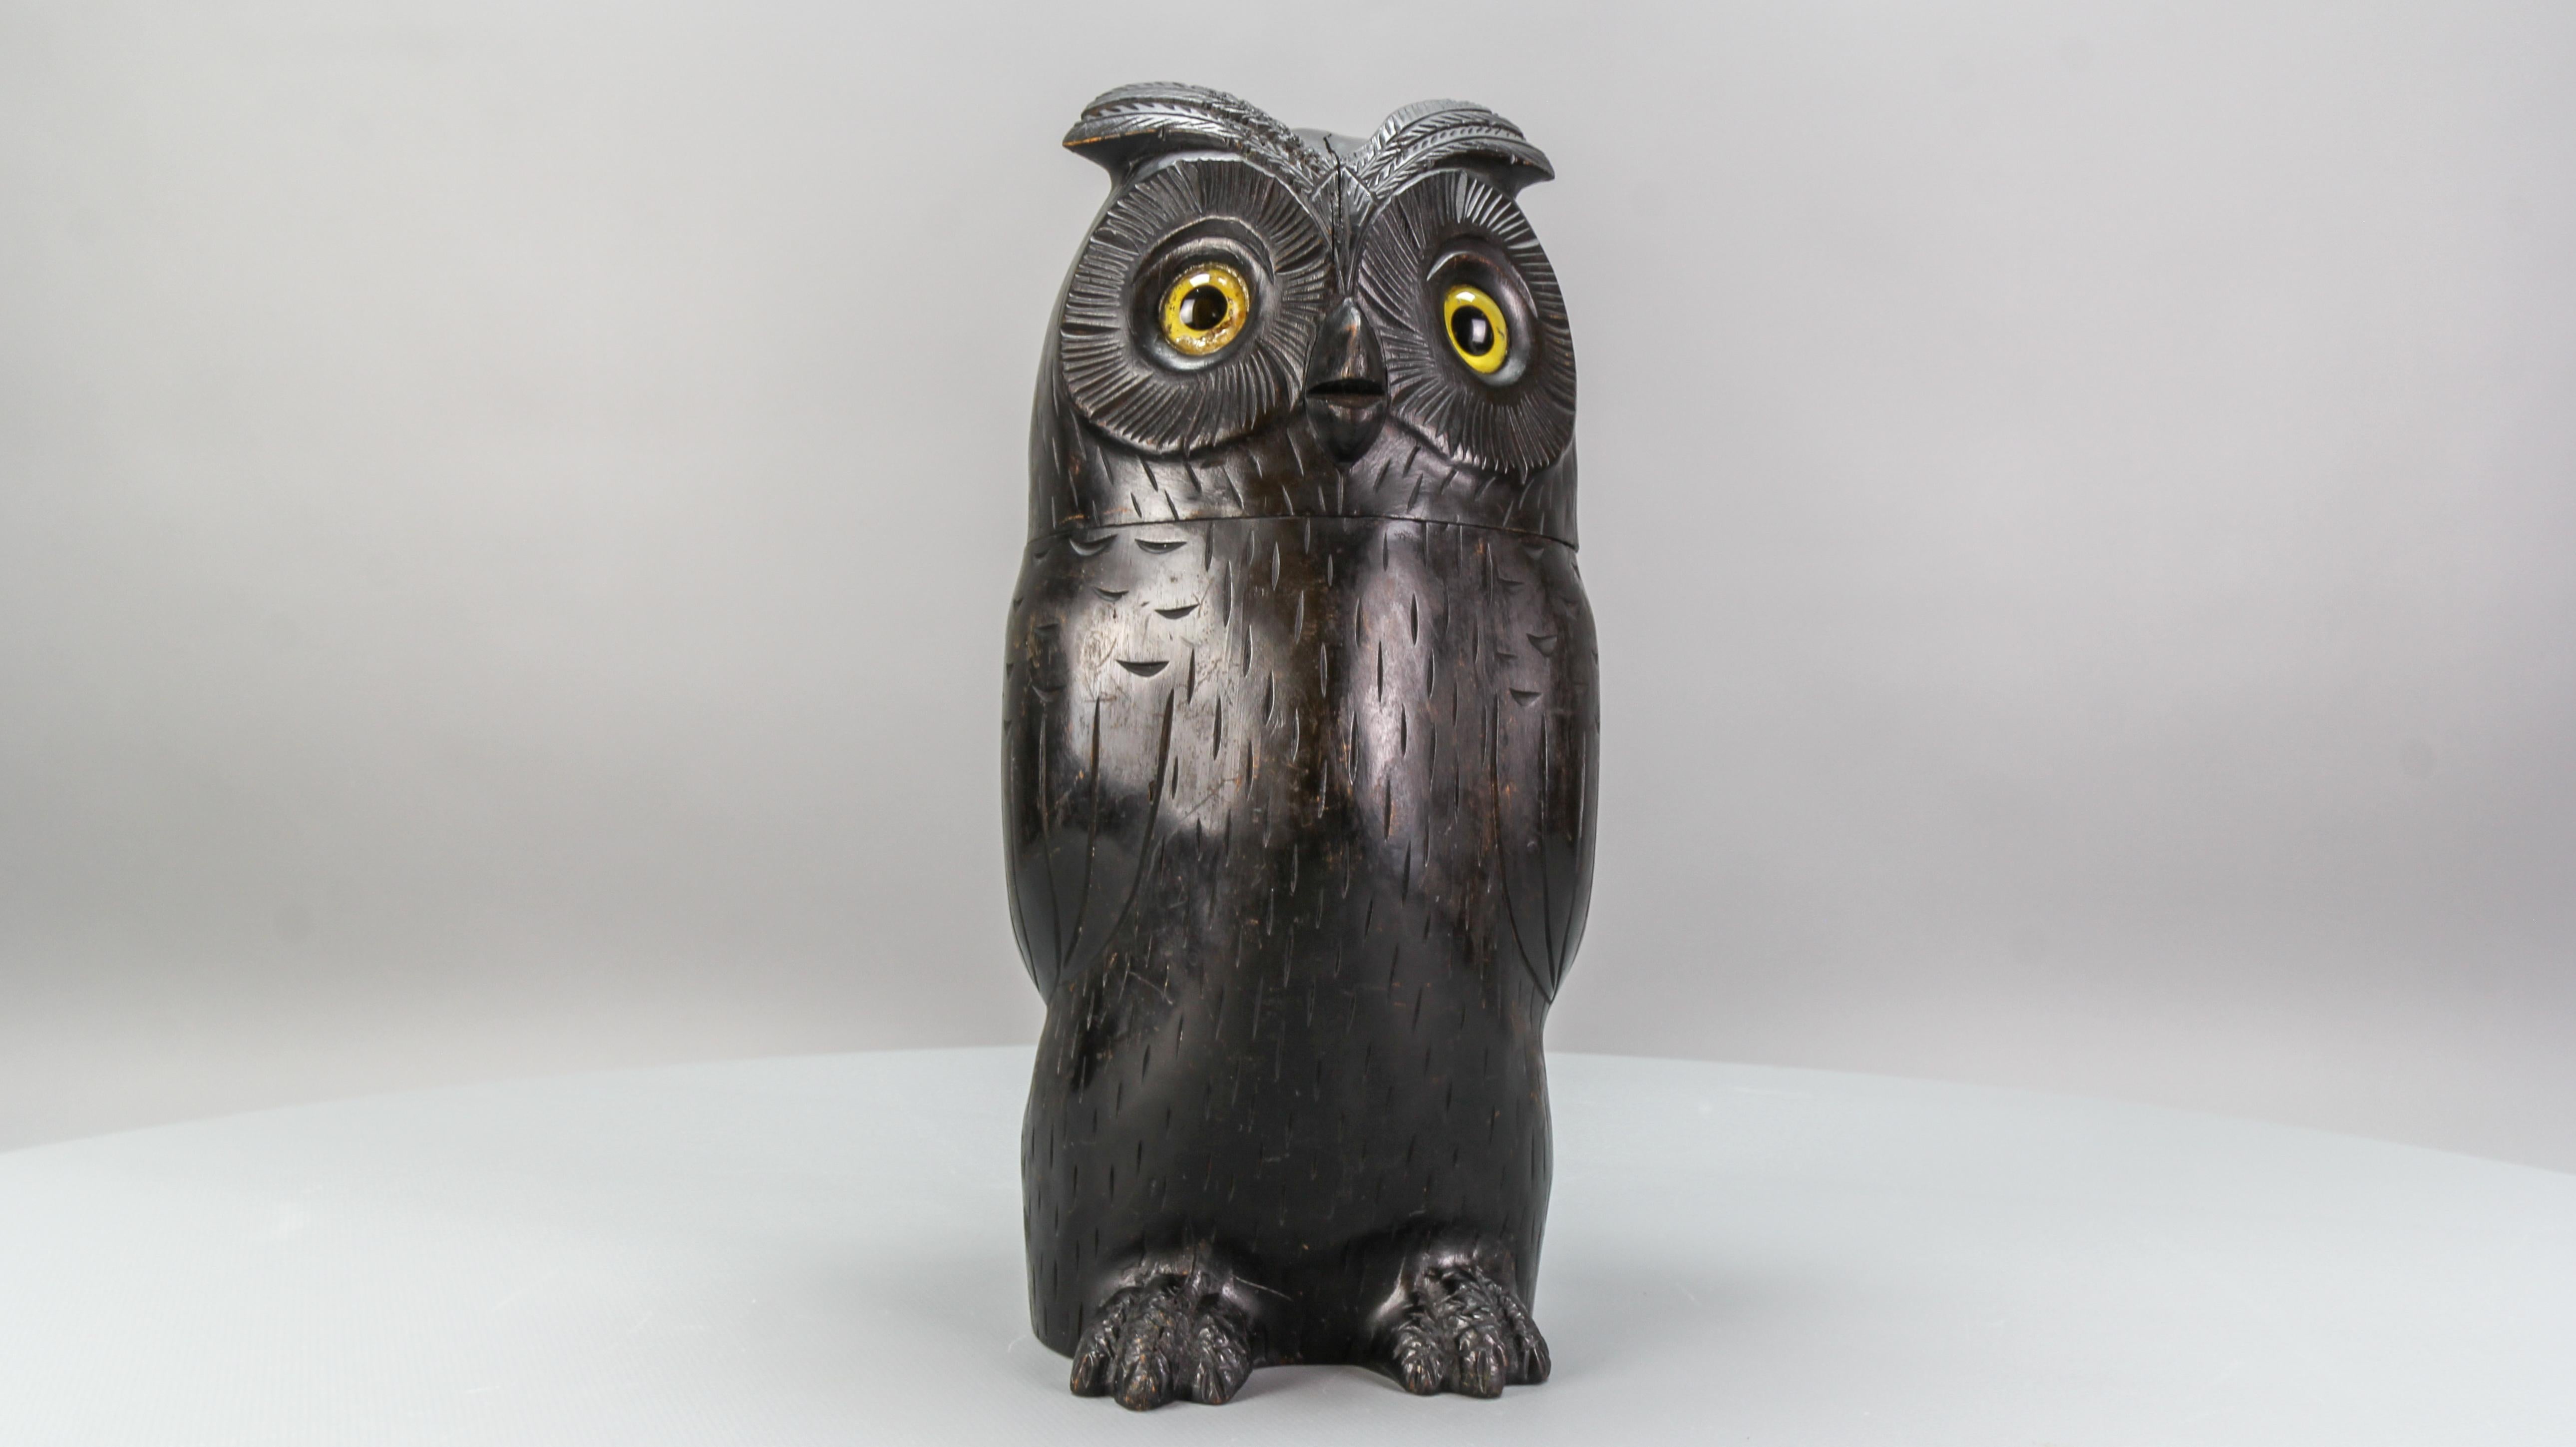 Antique Black Forest style oak wood carved trinket box or bucket in a shape of an owl, from circa 1920.
An impressive, large, and beautiful German Black Forest style hand-carved wooden trinket box or tea caddy made in the shape of an owl. 
The